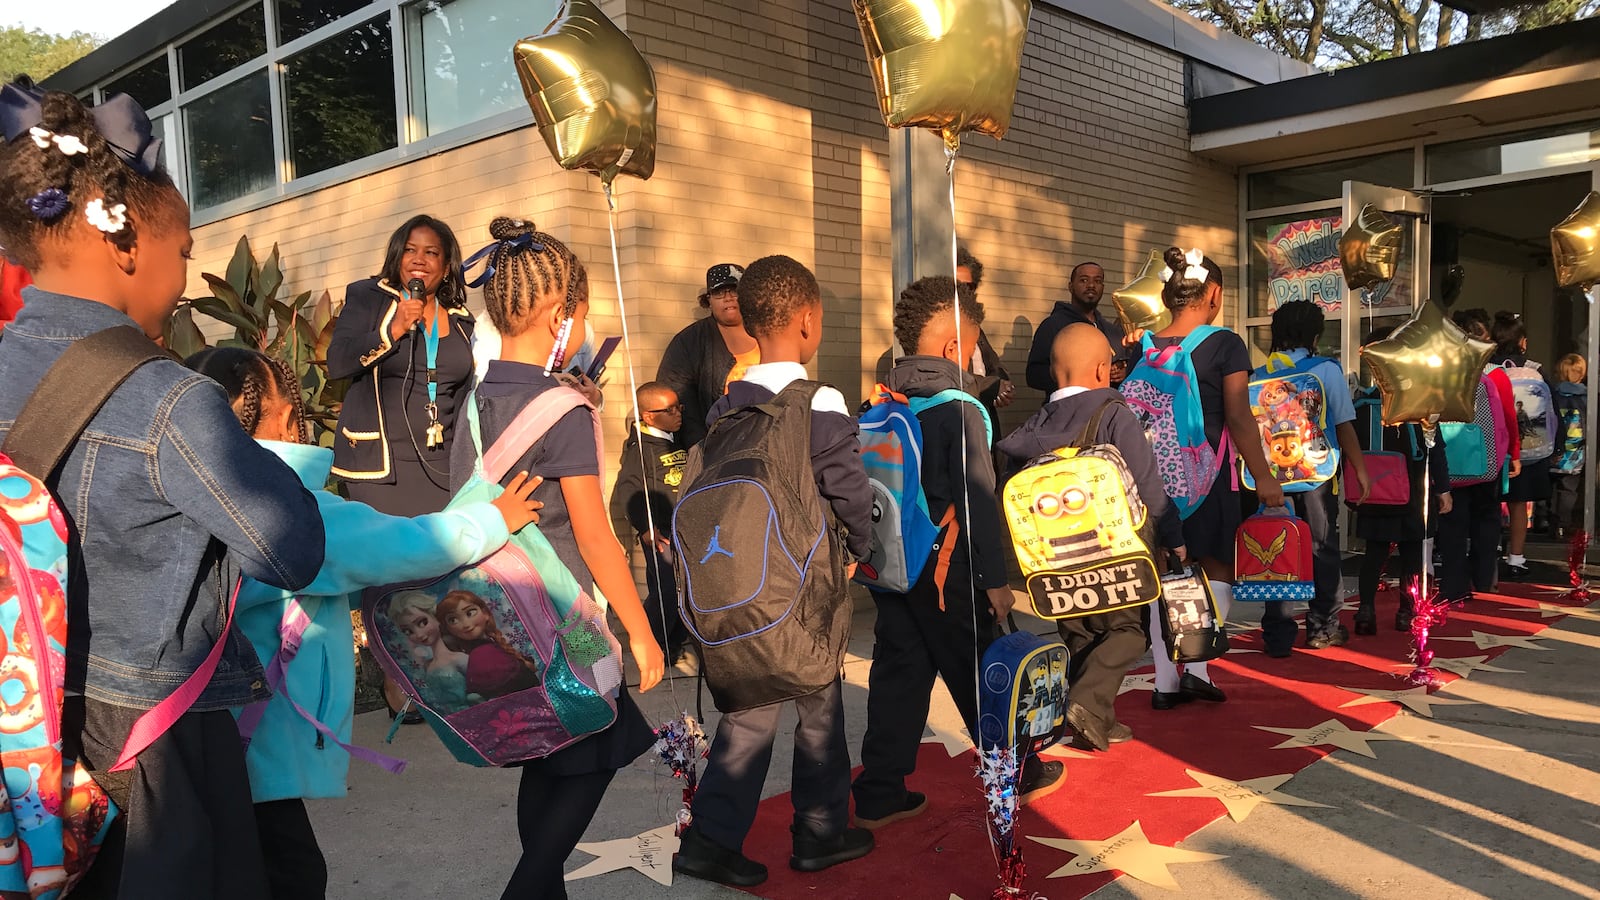 Not all district schools faced challenges on the first day. Students at Detroit's Chrysler elementary school walked the red carpet the school set up for the first day of school.